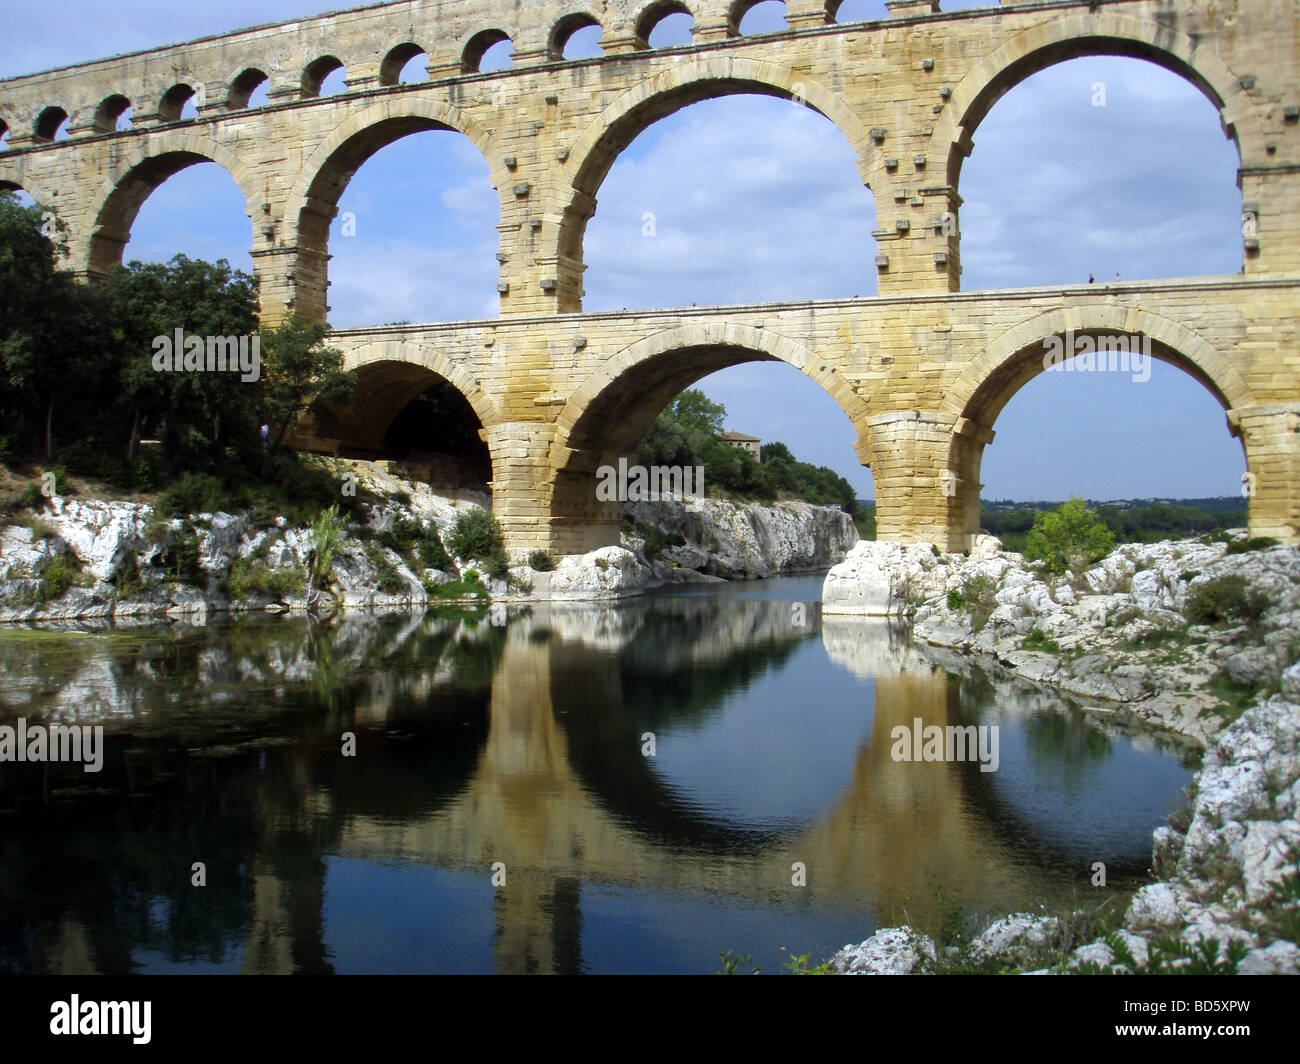 Roman Pont du Gard Aqueduct in Provence in the South of France Stock Photo